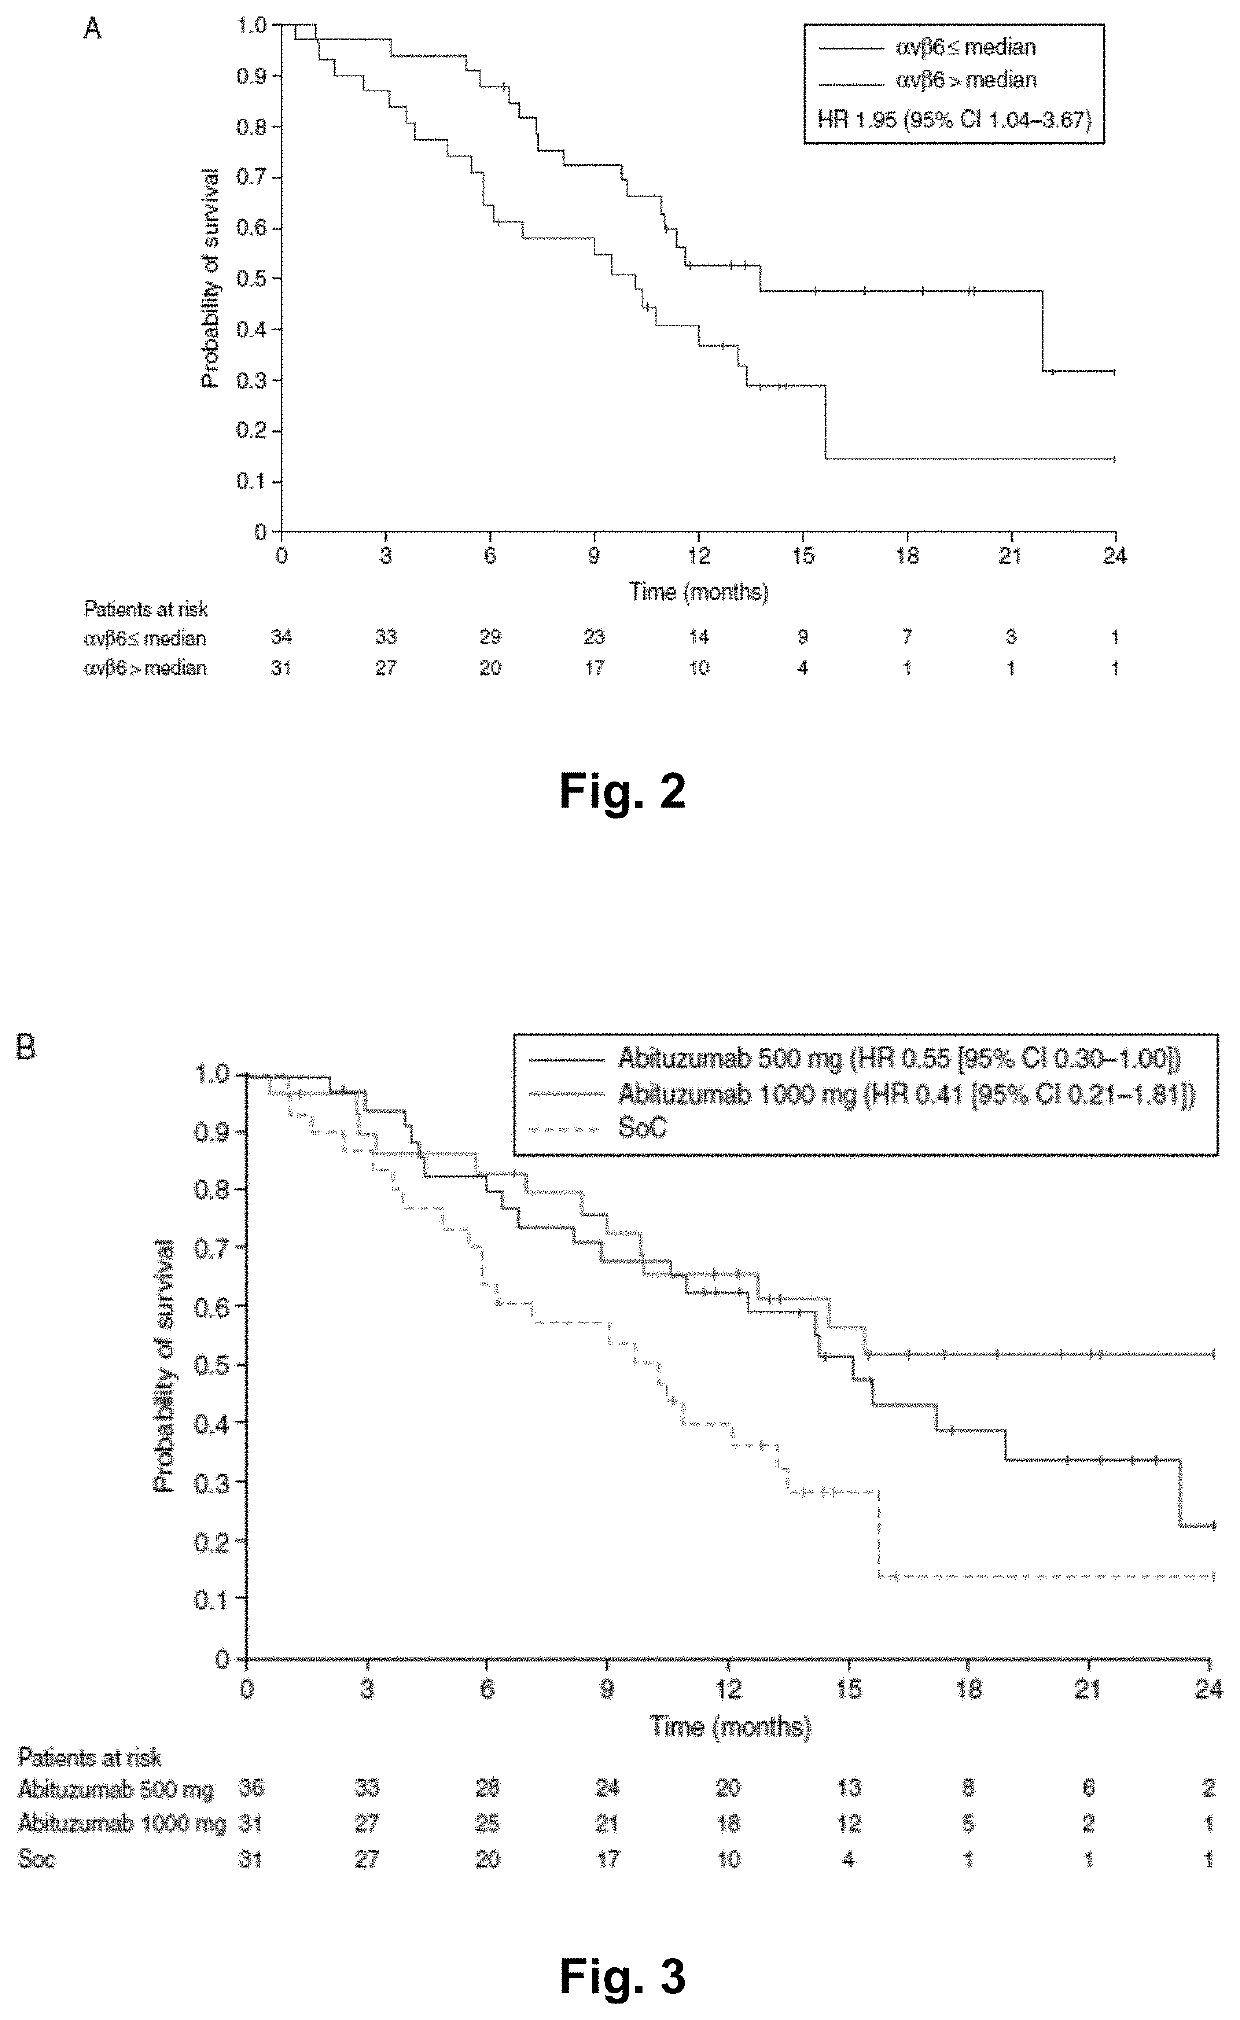 Abituzumab for the treatment of colorectal cancer